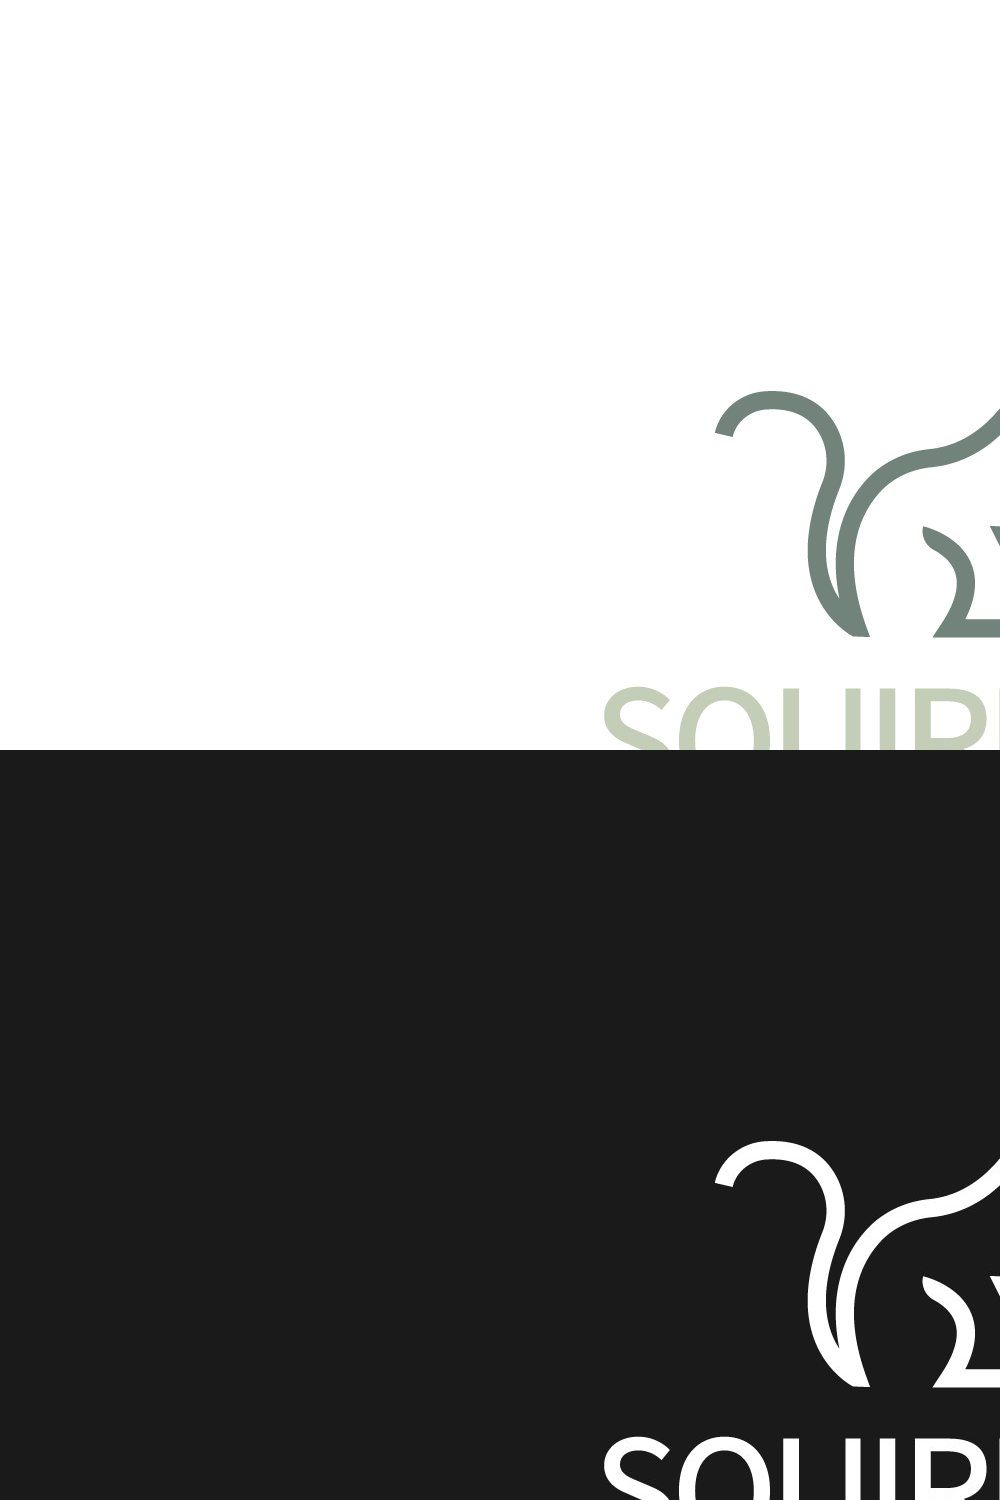 squirrel logo pinterest preview image.